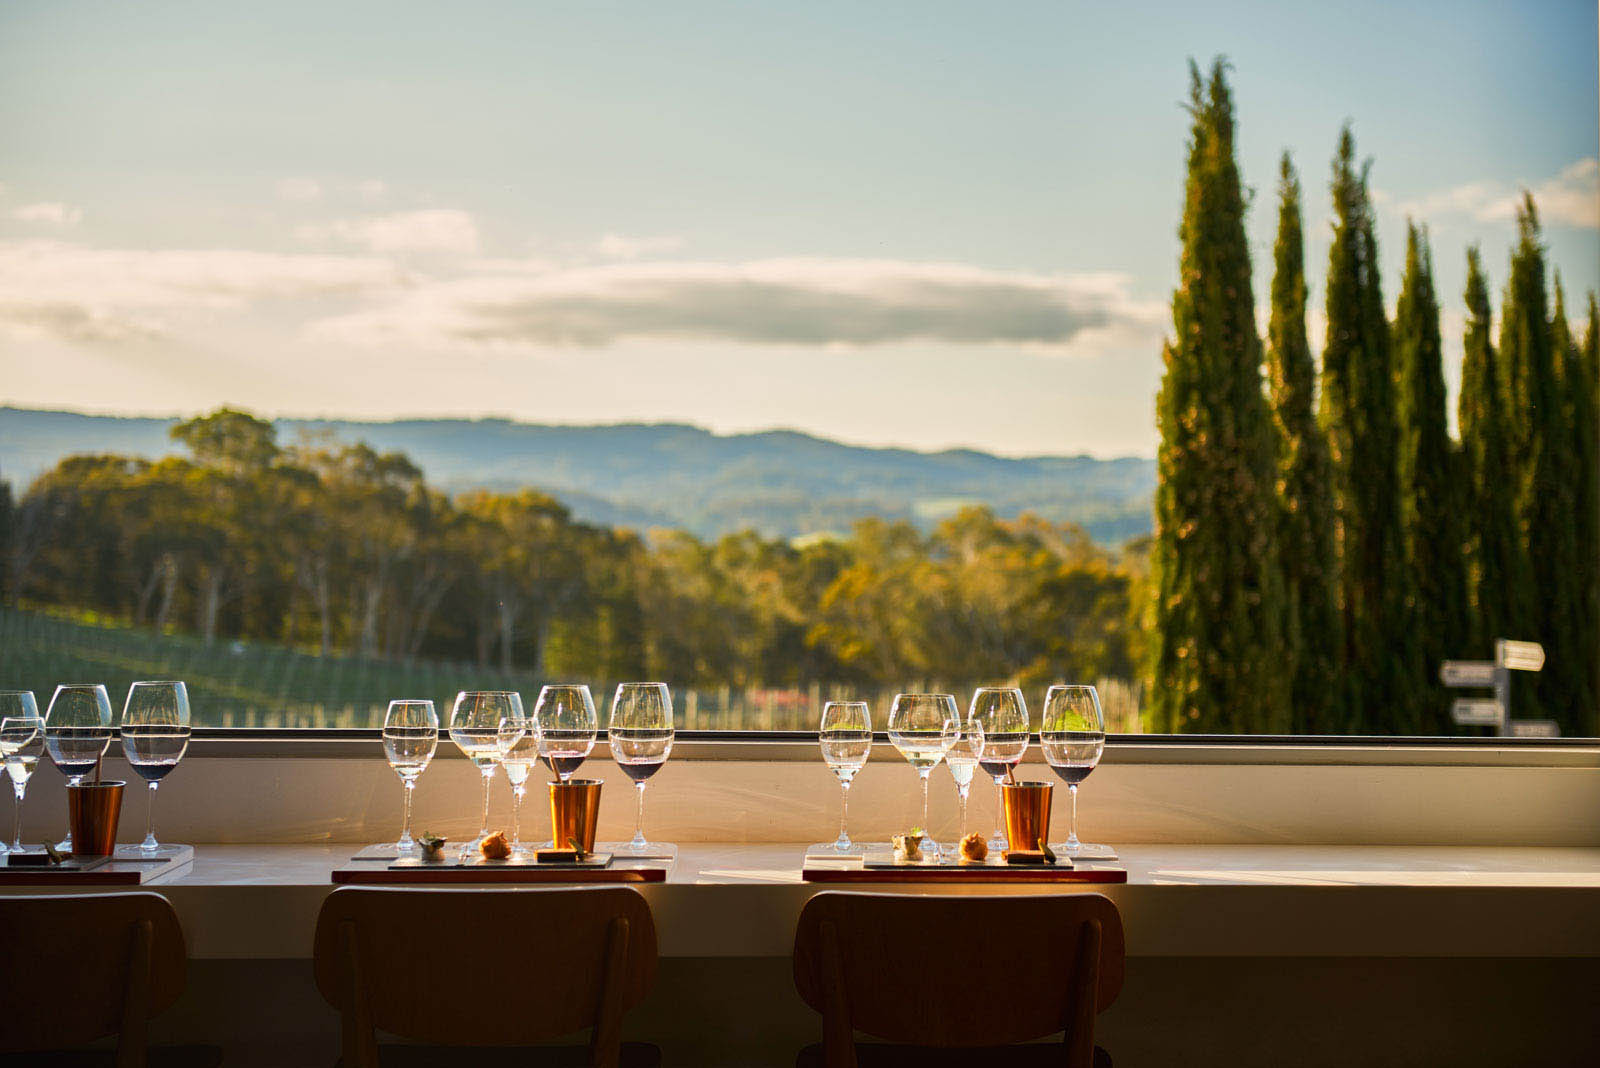 Overlooking the lush green hills at The Lane | 10 of the best wineries to visit in South Australia